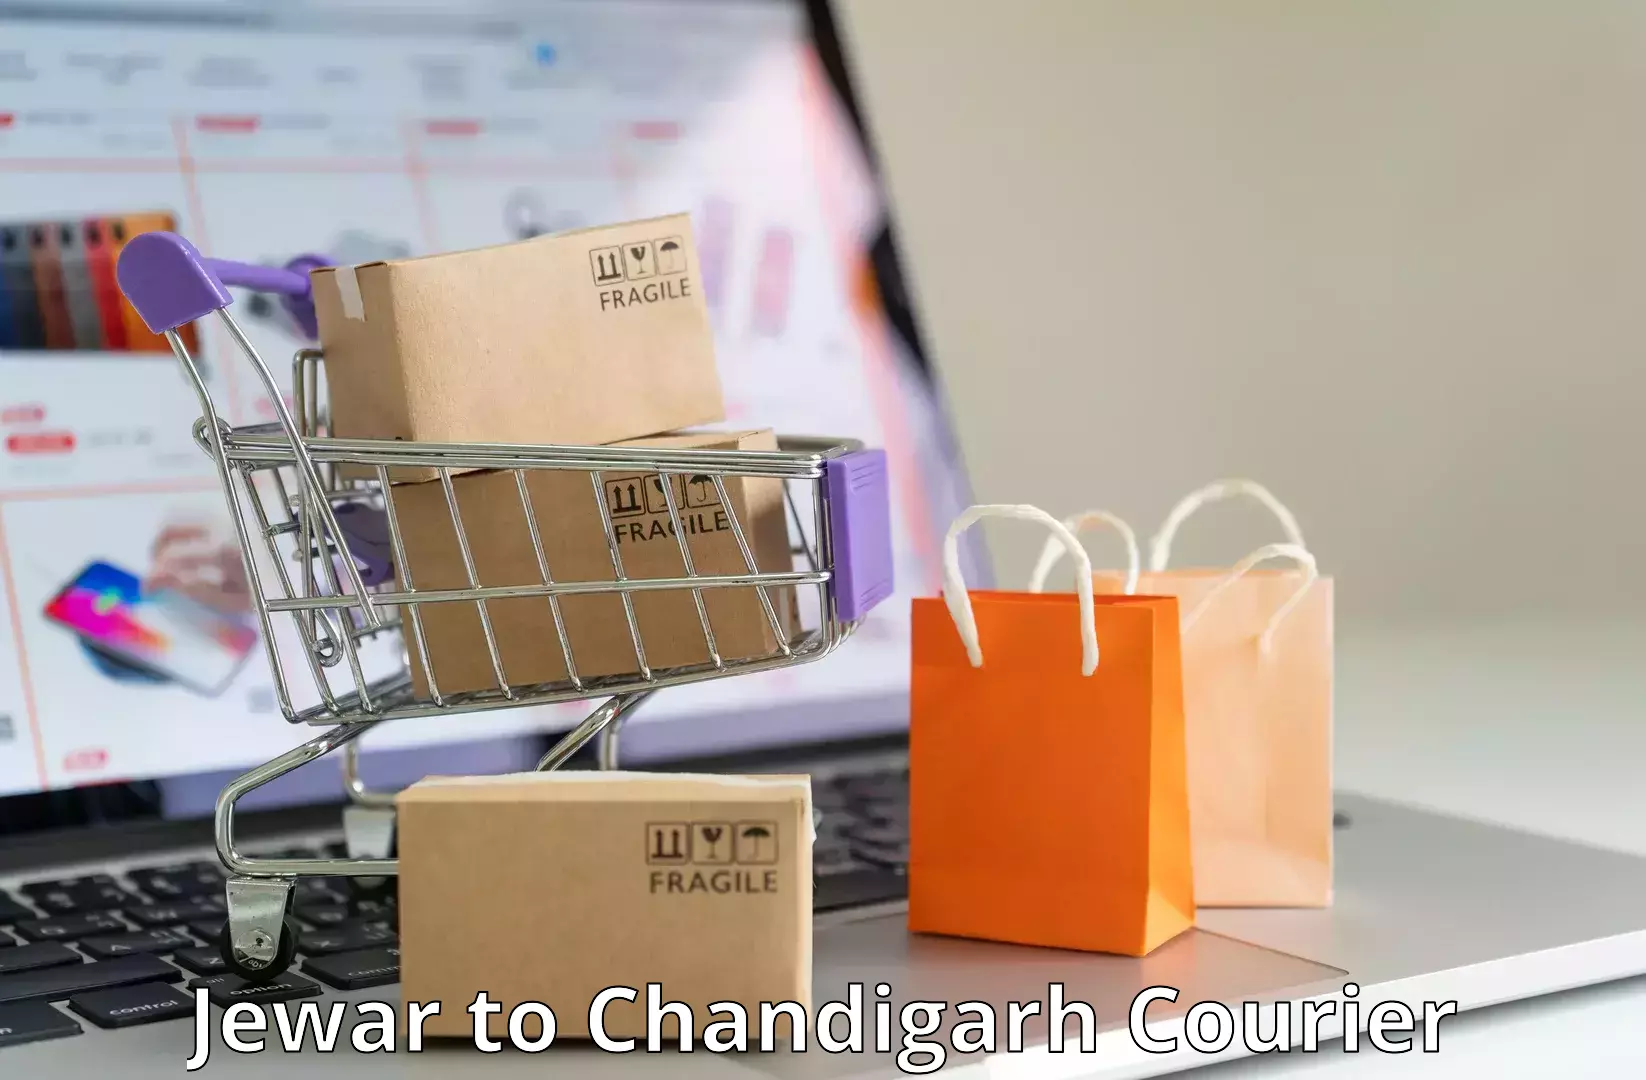 Express delivery solutions Jewar to Chandigarh